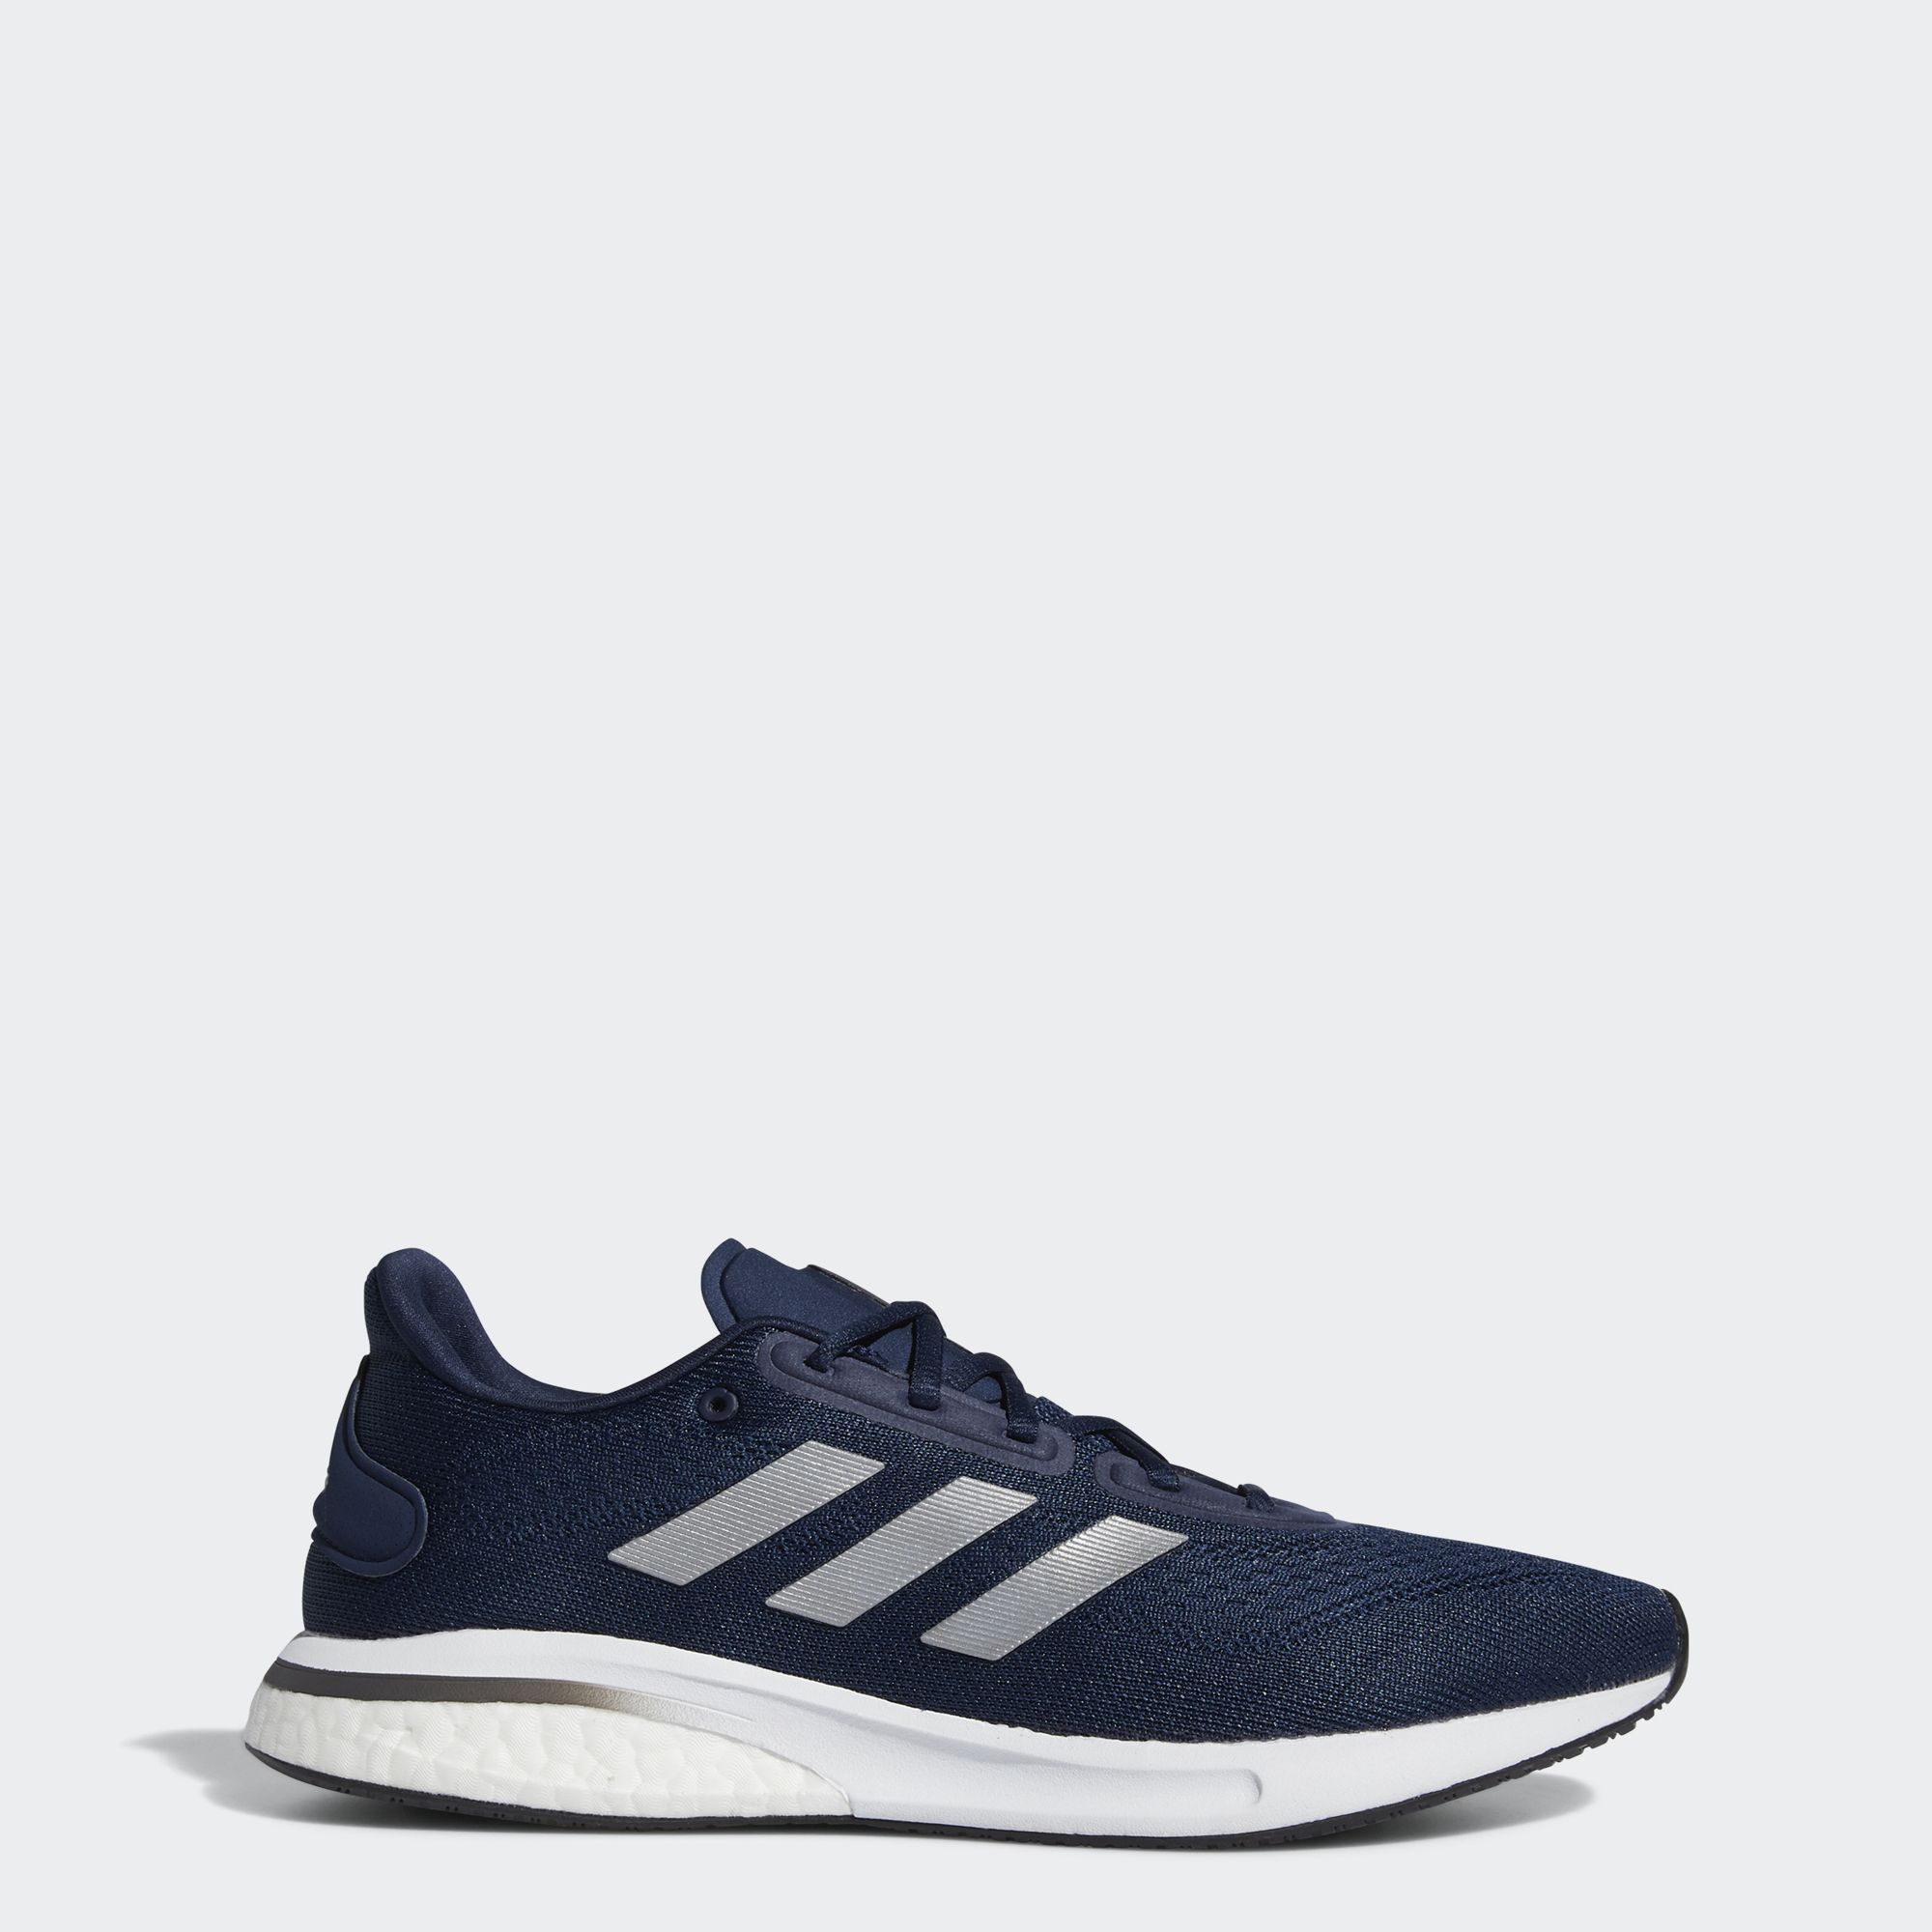 adidas shoes sales